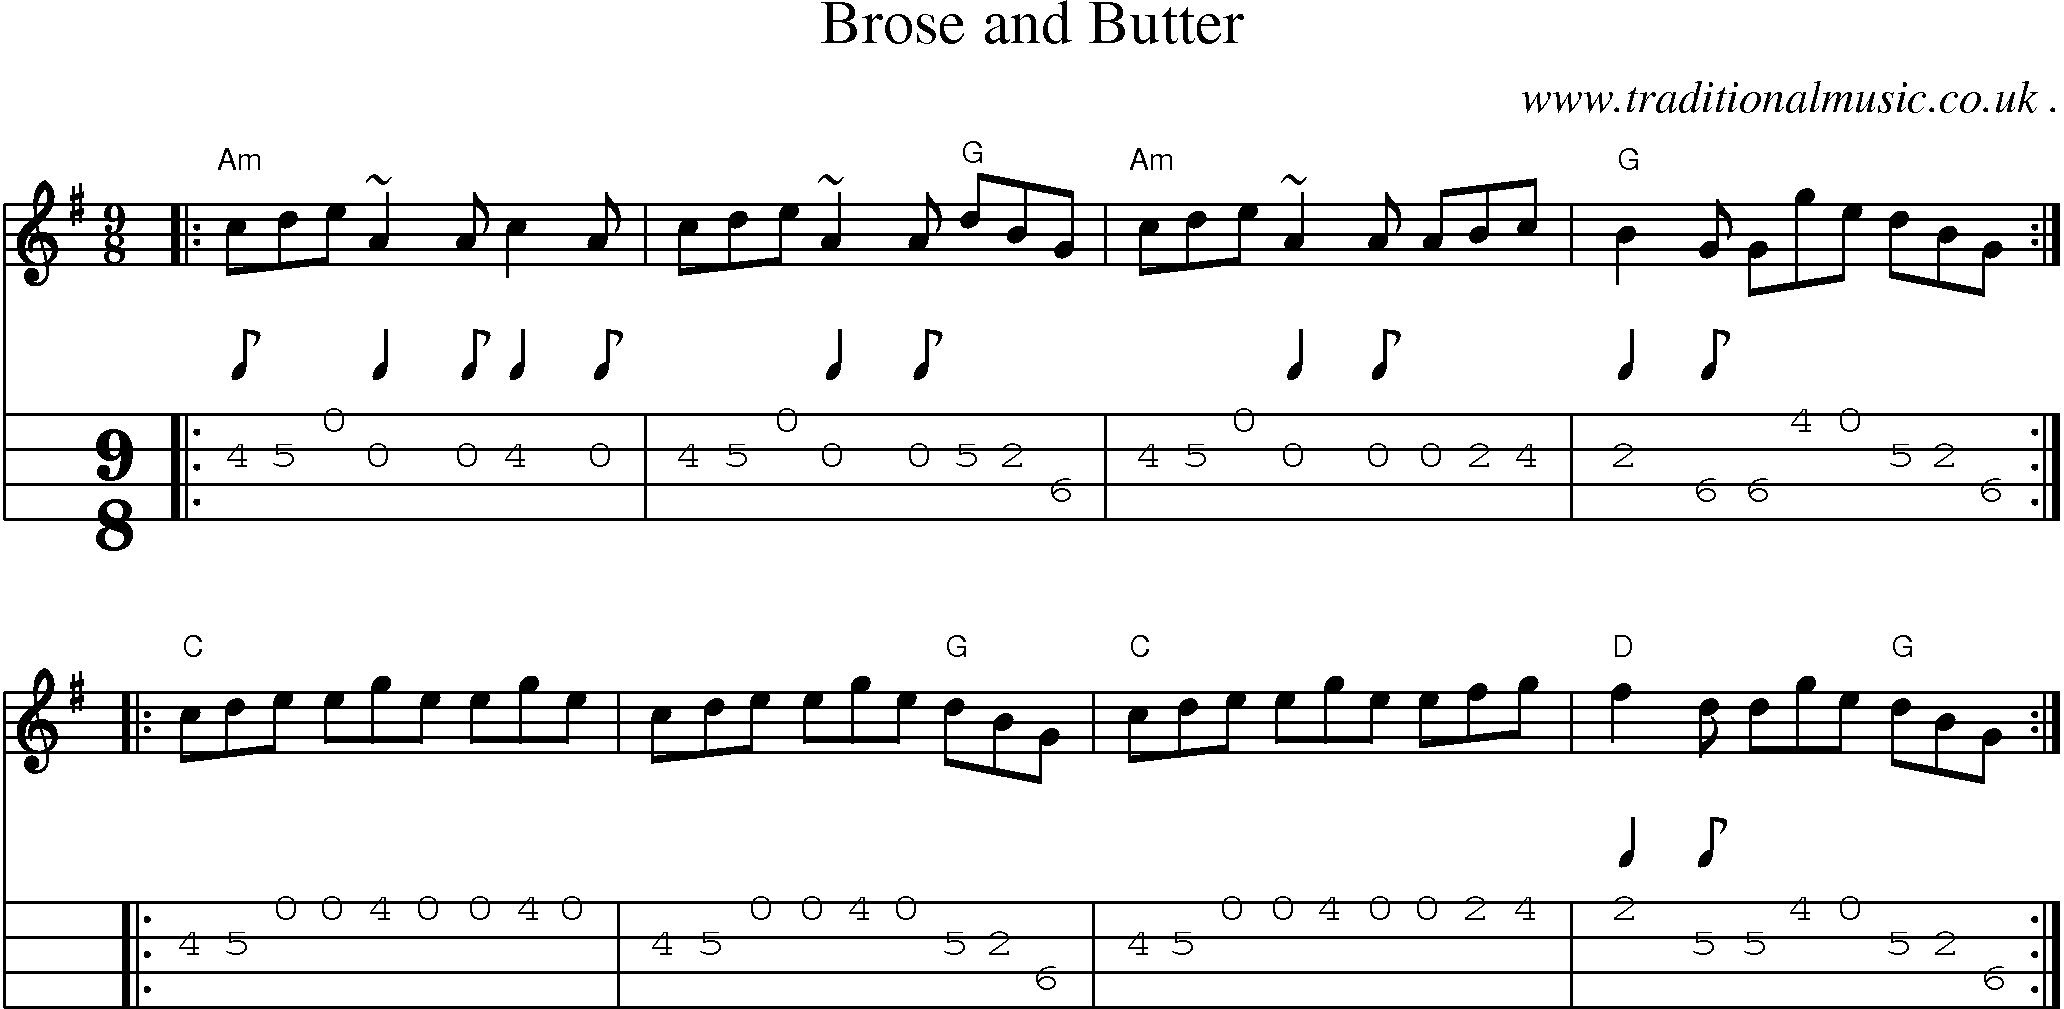 Sheet-music  score, Chords and Mandolin Tabs for Brose And Butter